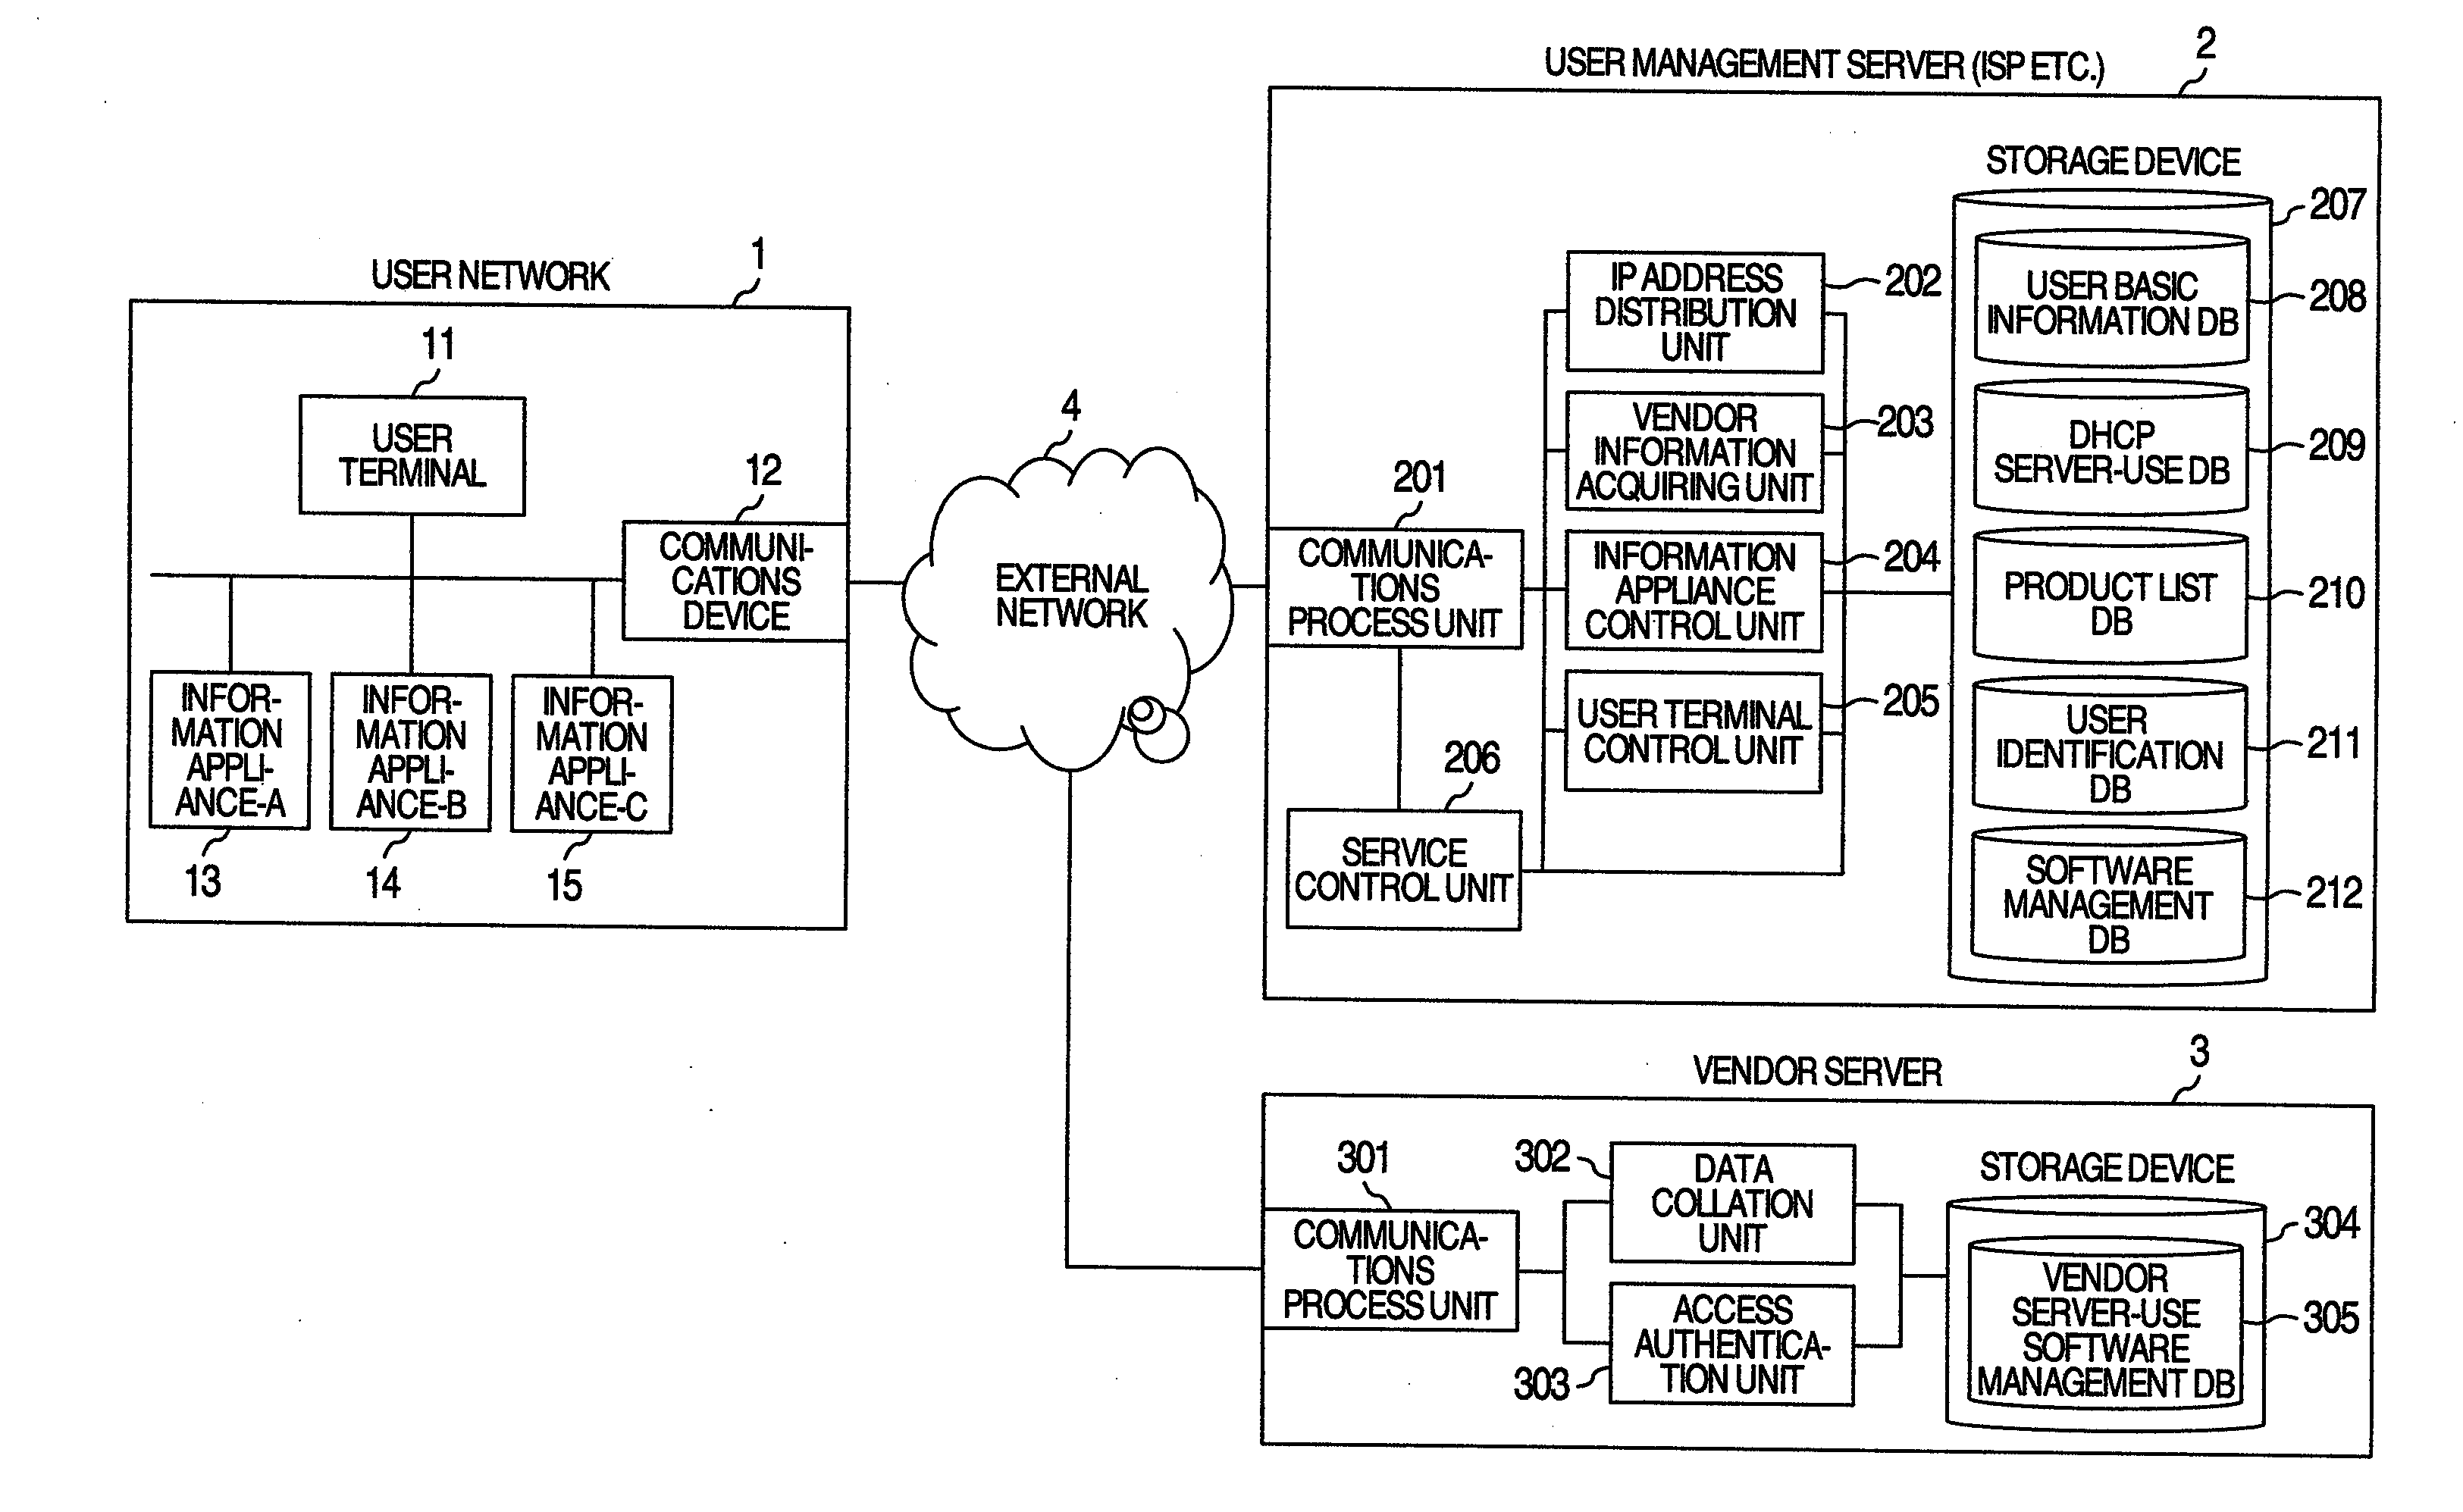 Software update system for information equipment